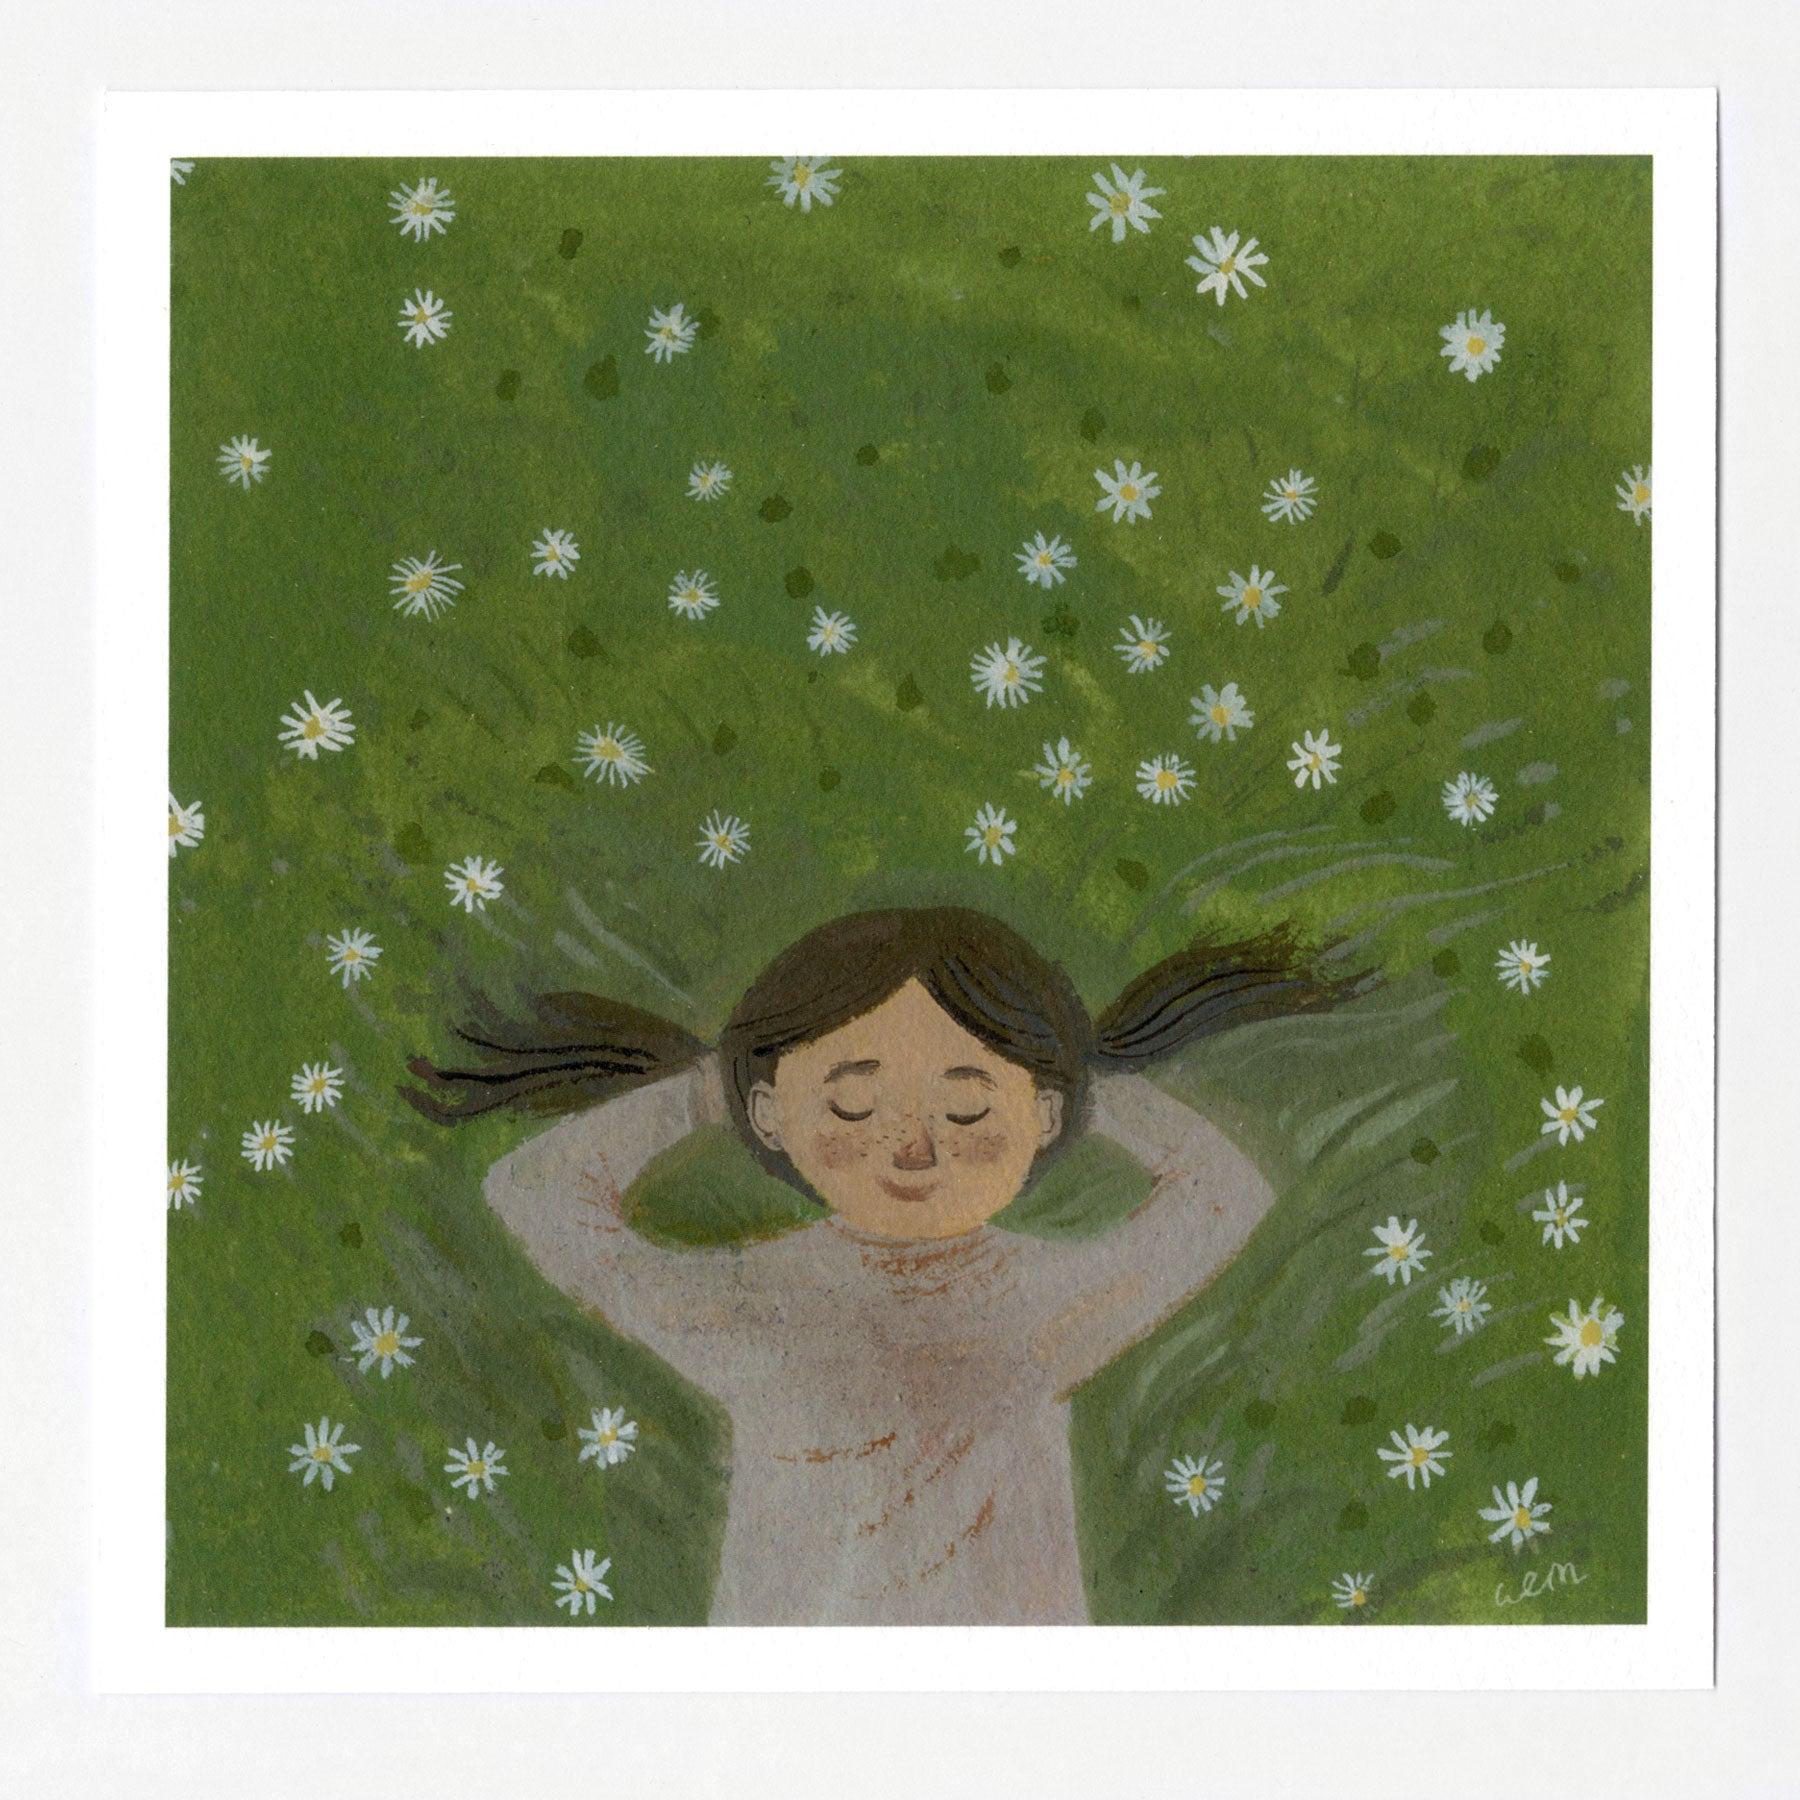 Dreaming in the Daisies 7x7 print